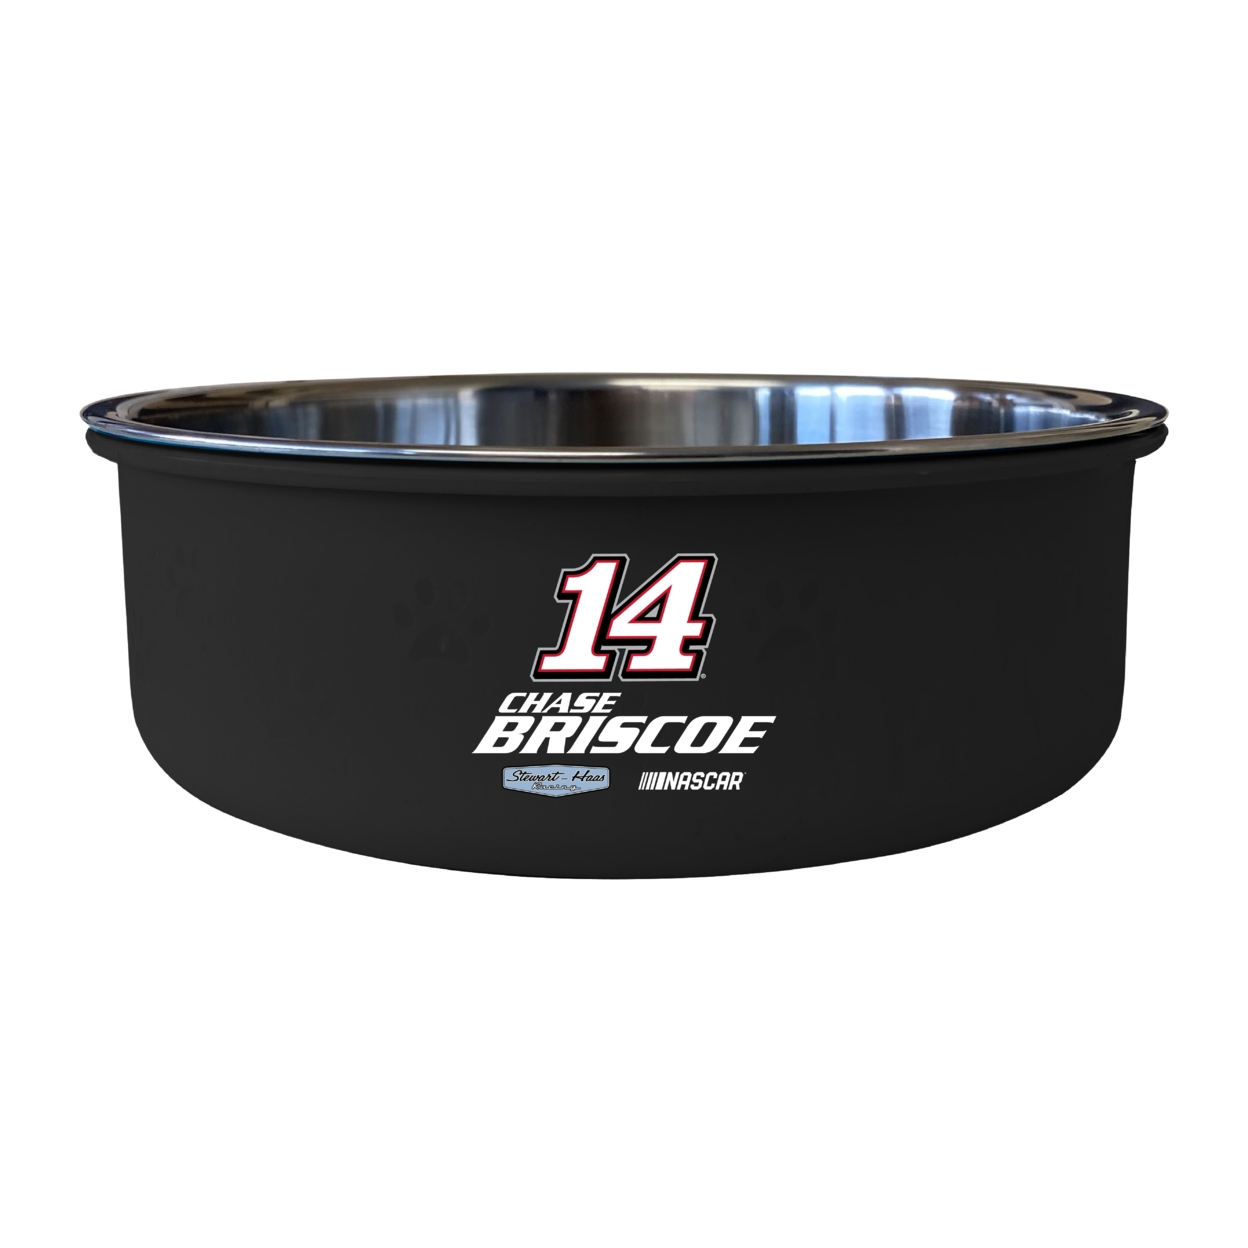 #14 Chase Briscoe Officially Licensed 5x2.25 Pet Bowl